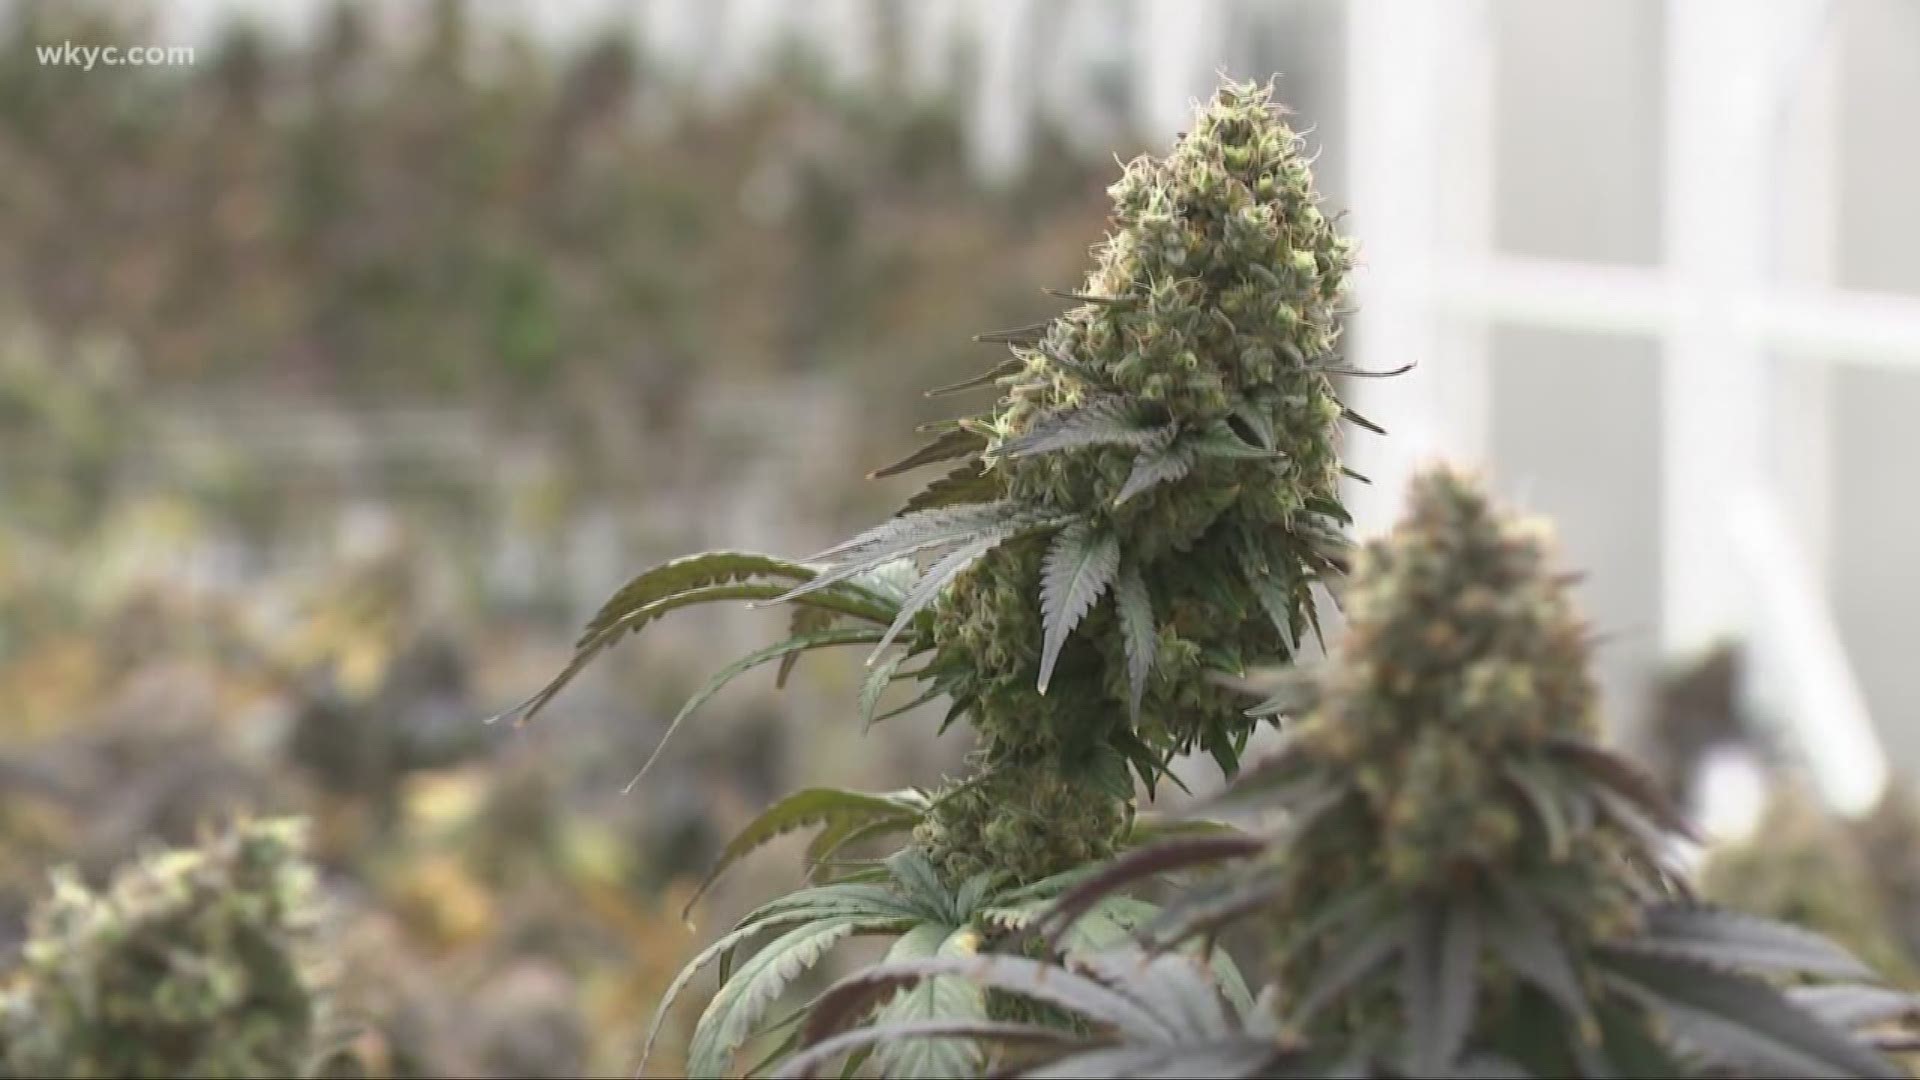 Ohio's attorney general says a new program will help local law enforcement differentiate between legal hemp and illegal marijuana.